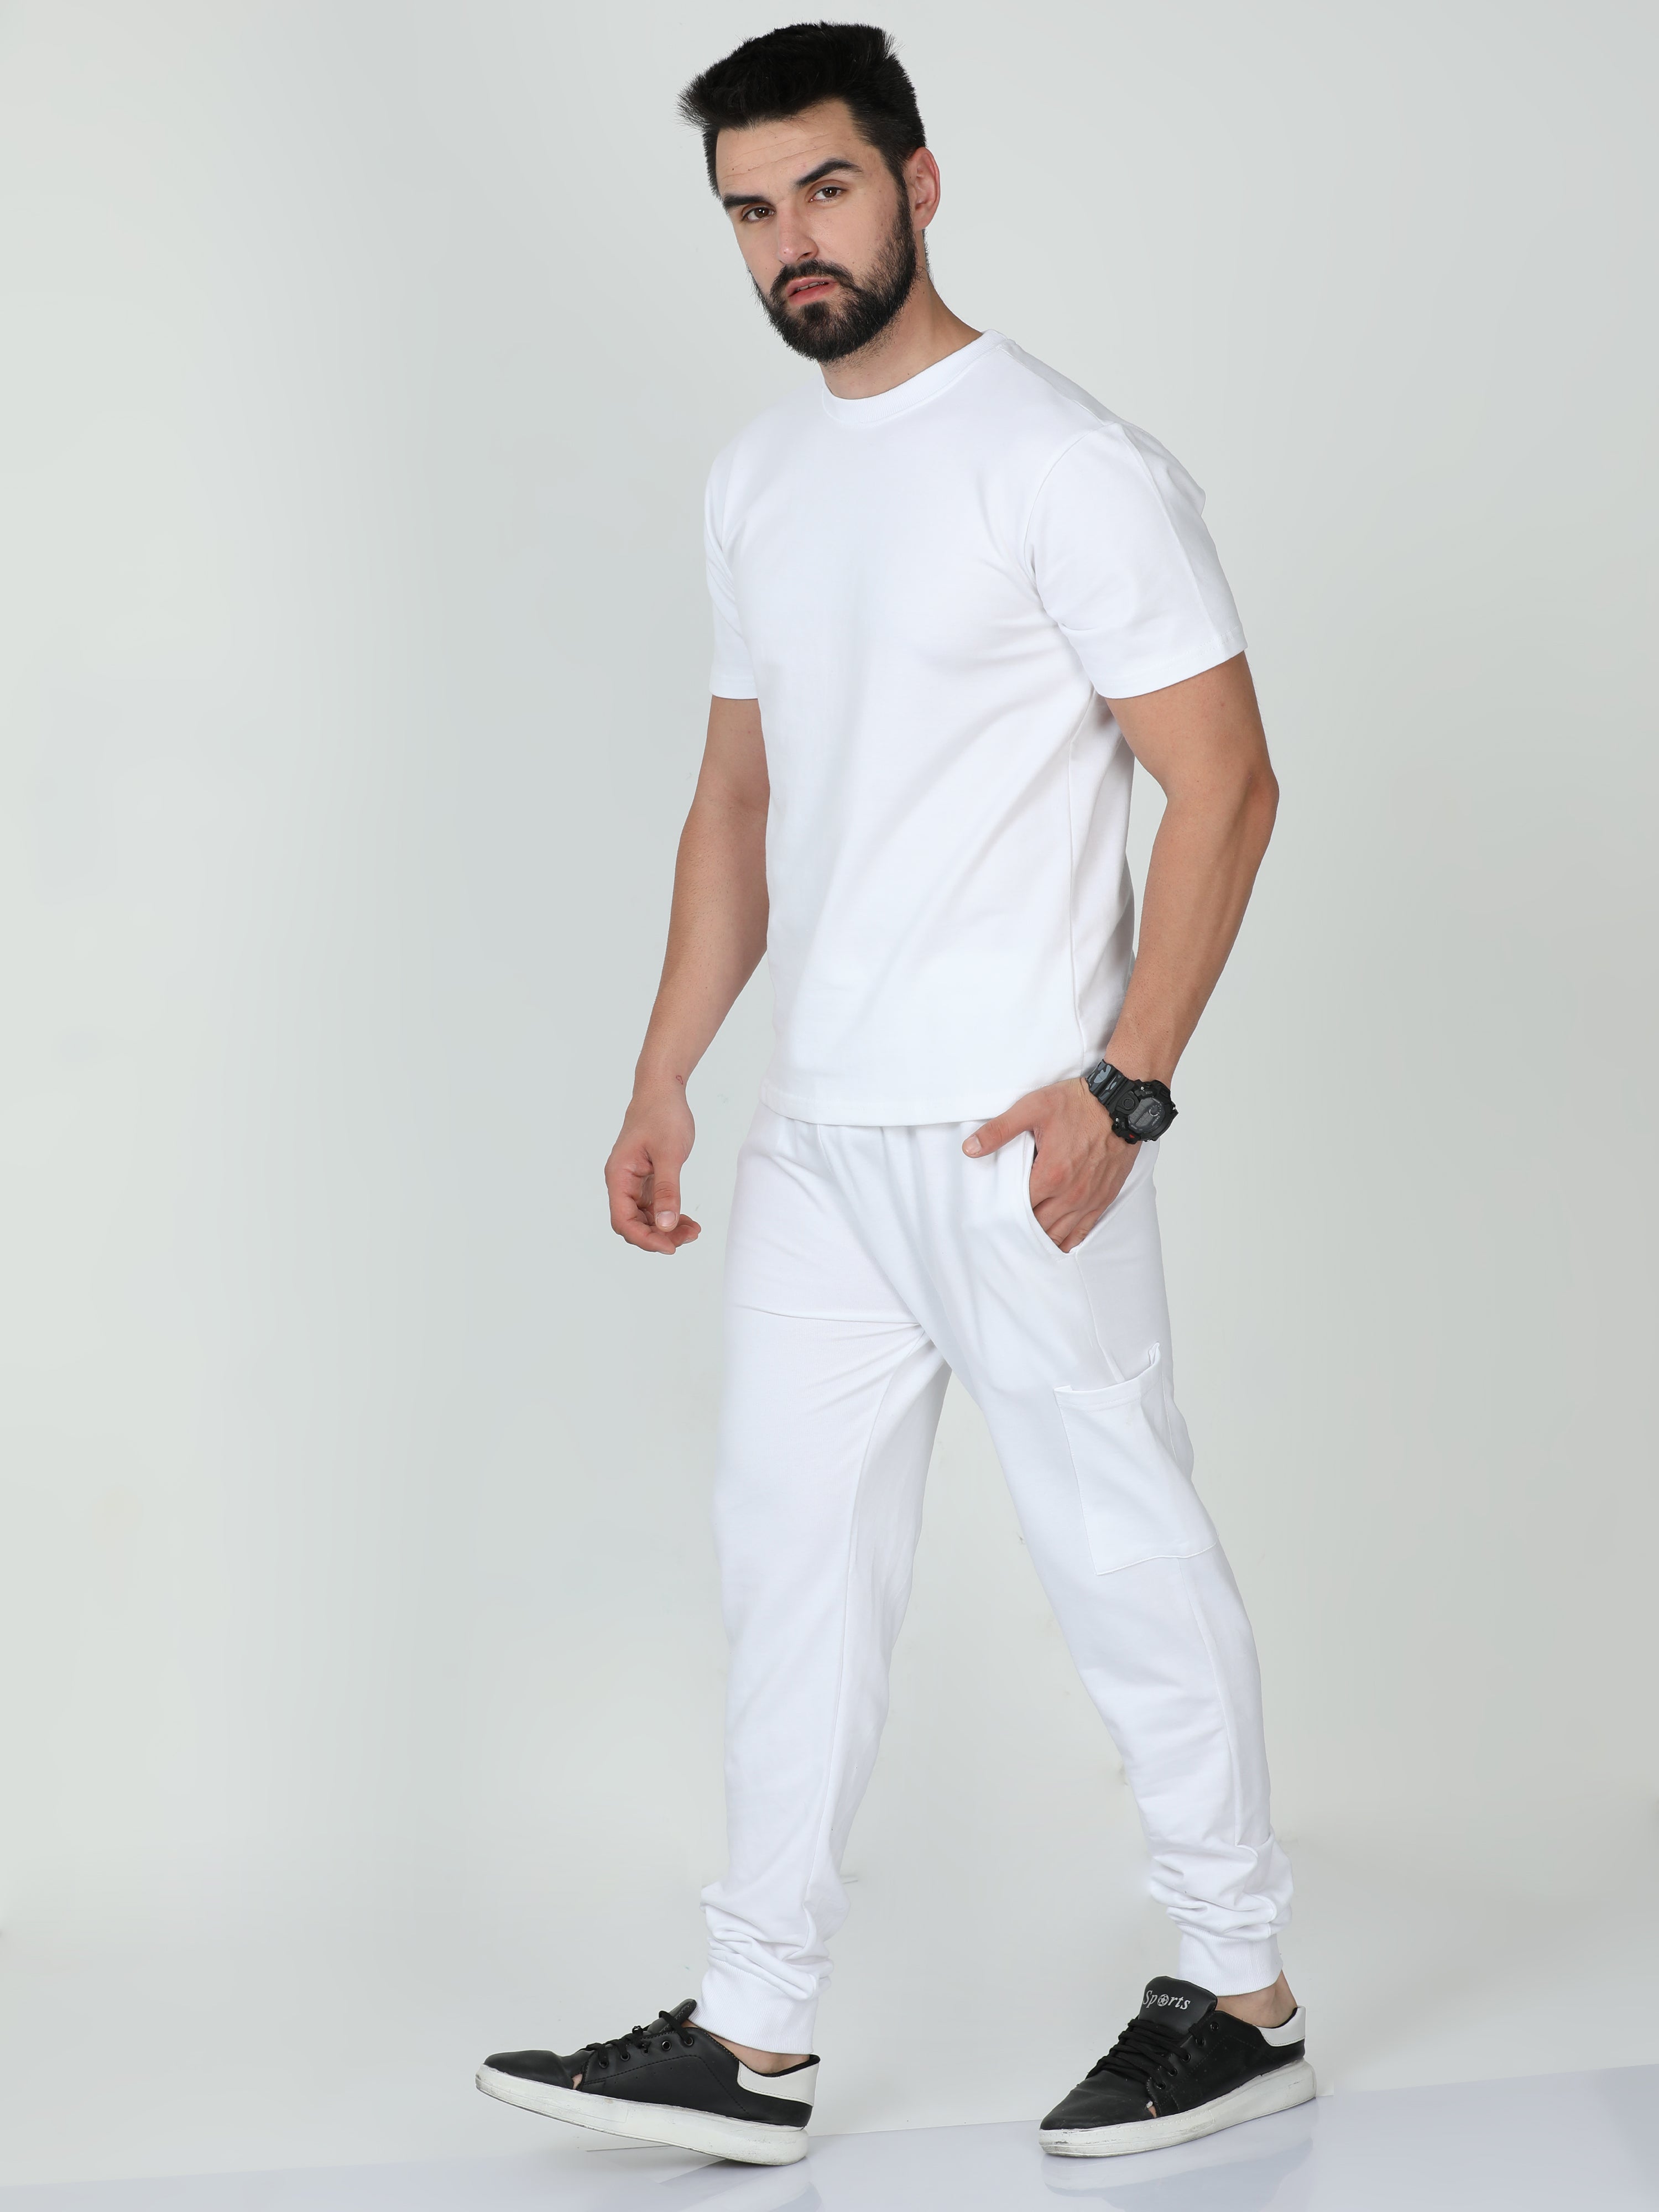 White Shirt And Black Track Pants Athleisure Trend Basics 2023  Become  Chic